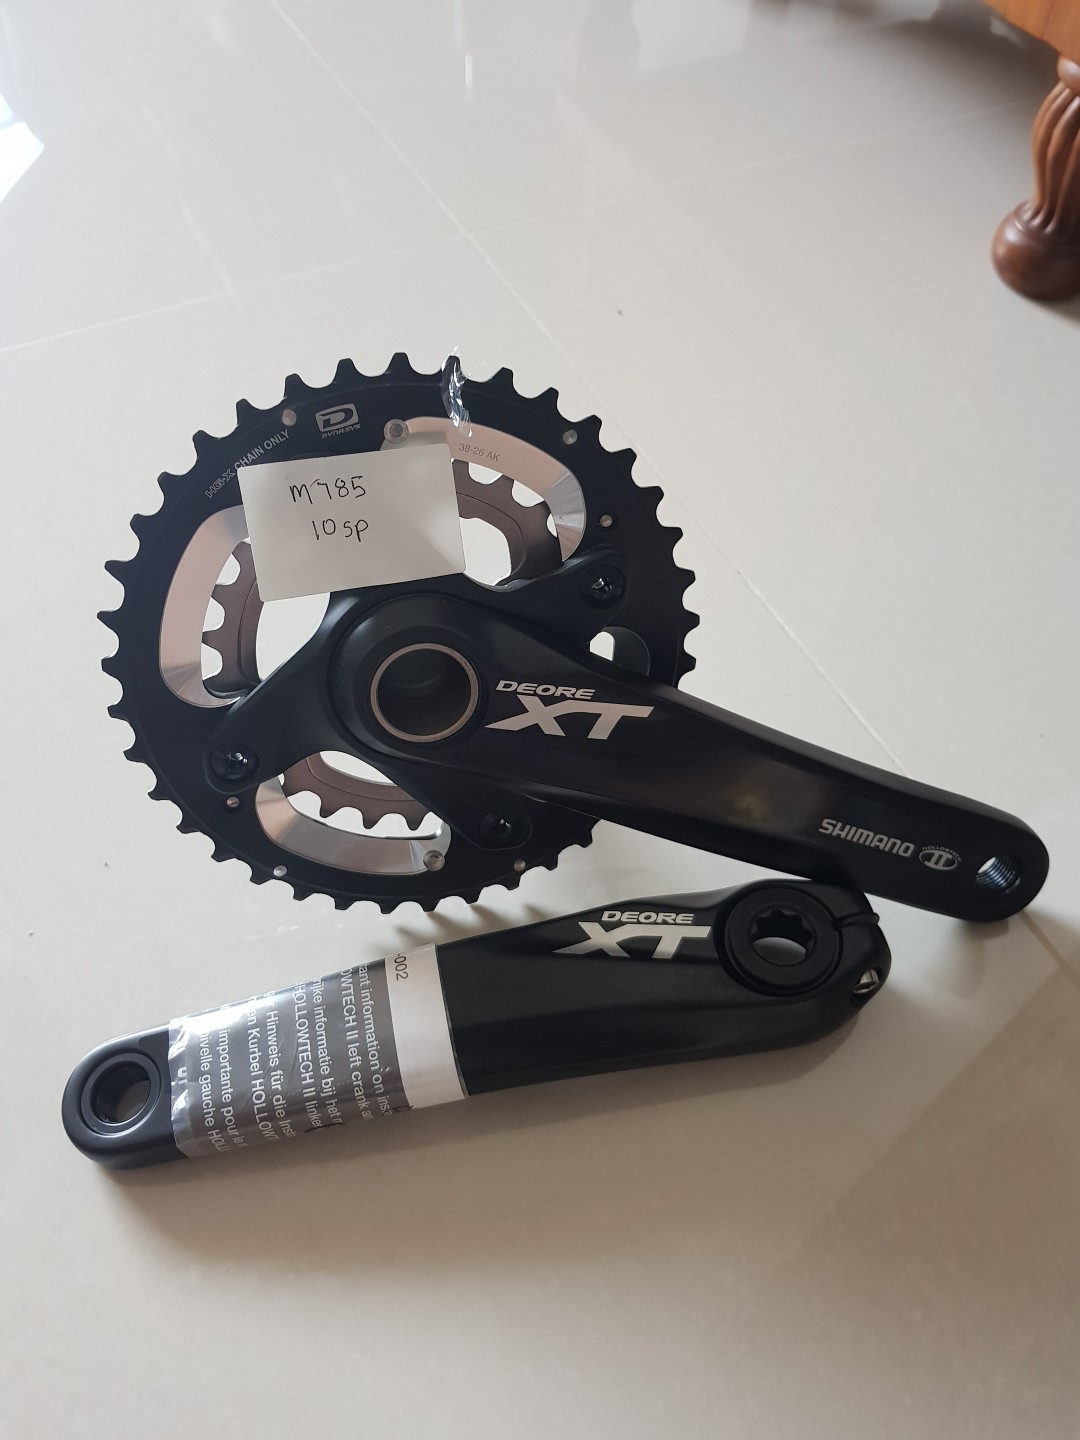 XT FC-M785 38-26T 170mm 10S Crankset, Sports Bicycles Parts, & Accessories on Carousell